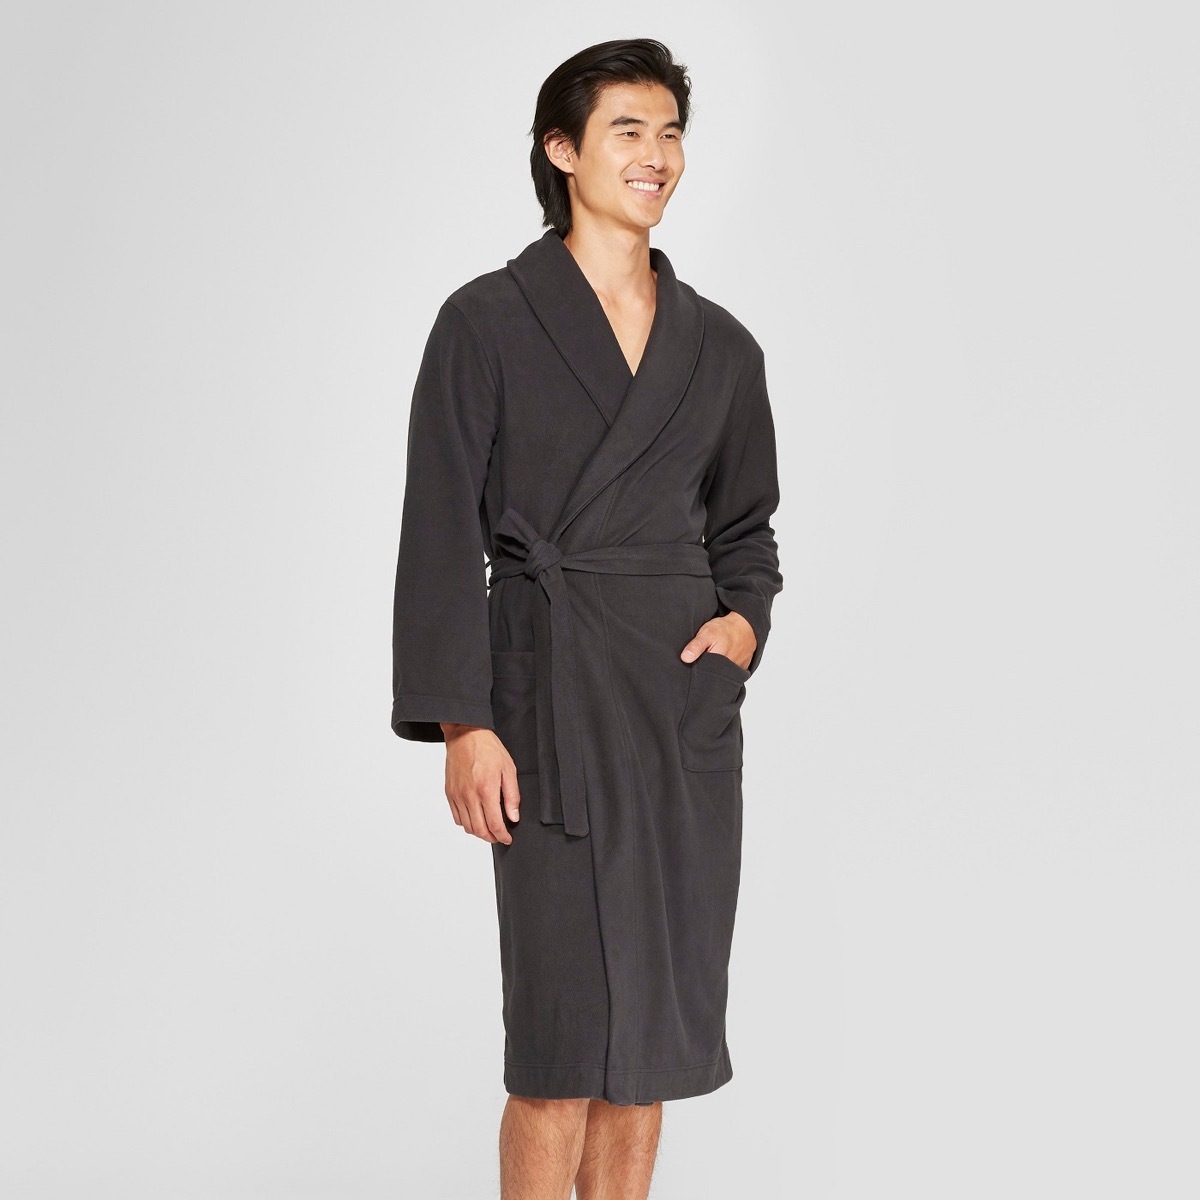 House Robe {Target Home Essentials}